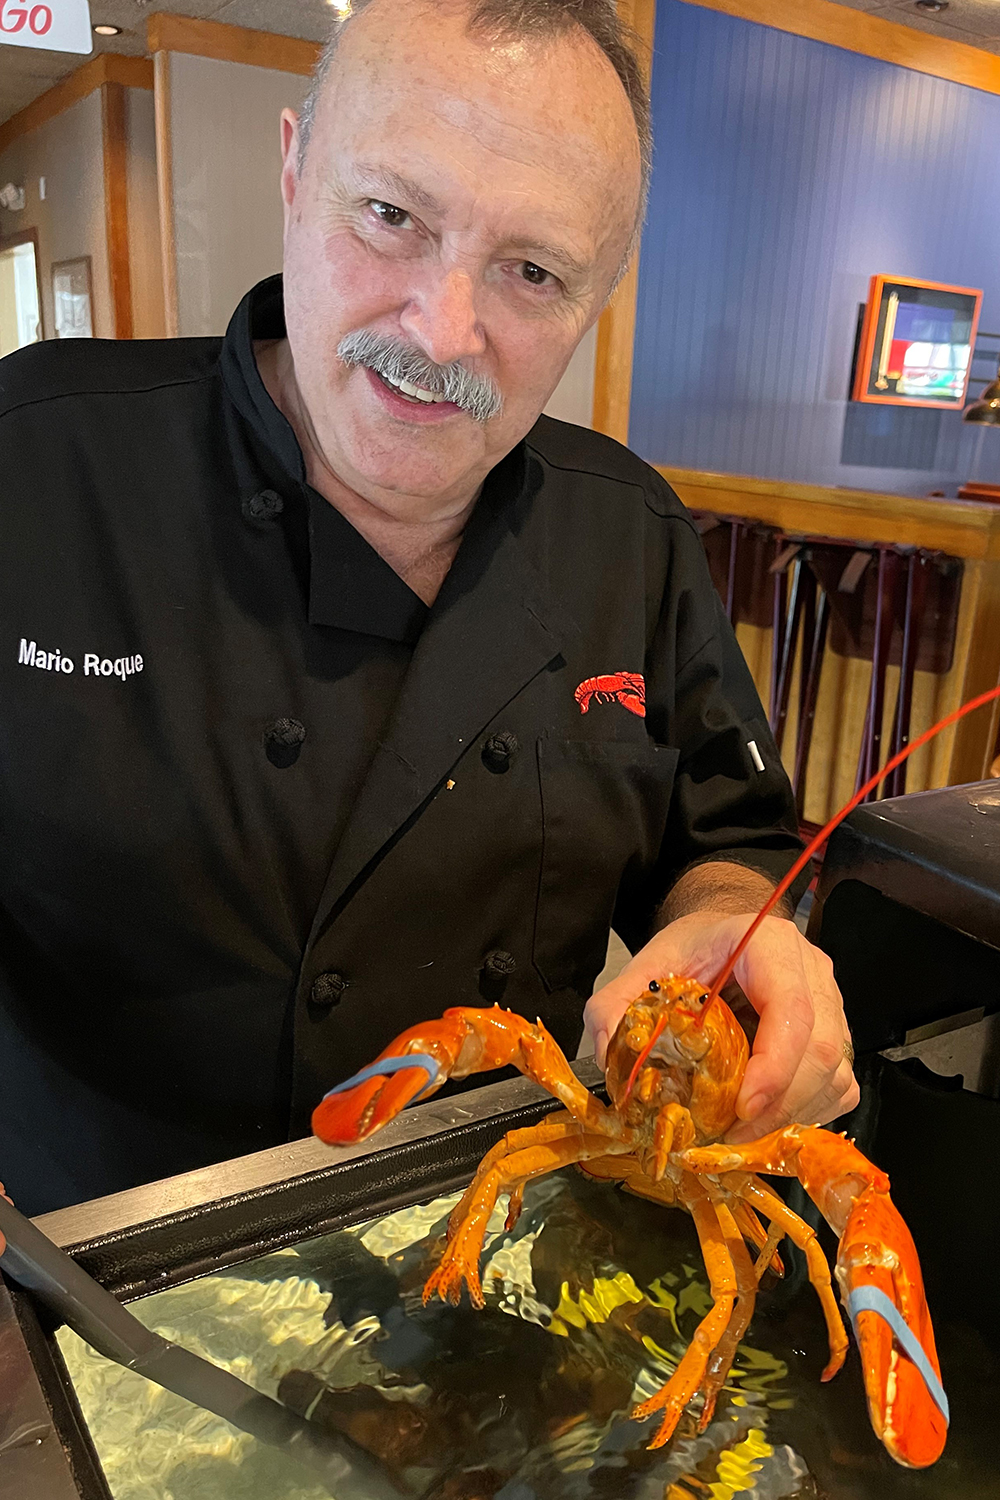 Florida Red Lobster Employees Rescue Rare Orange Lobster Shipped to Restaurant